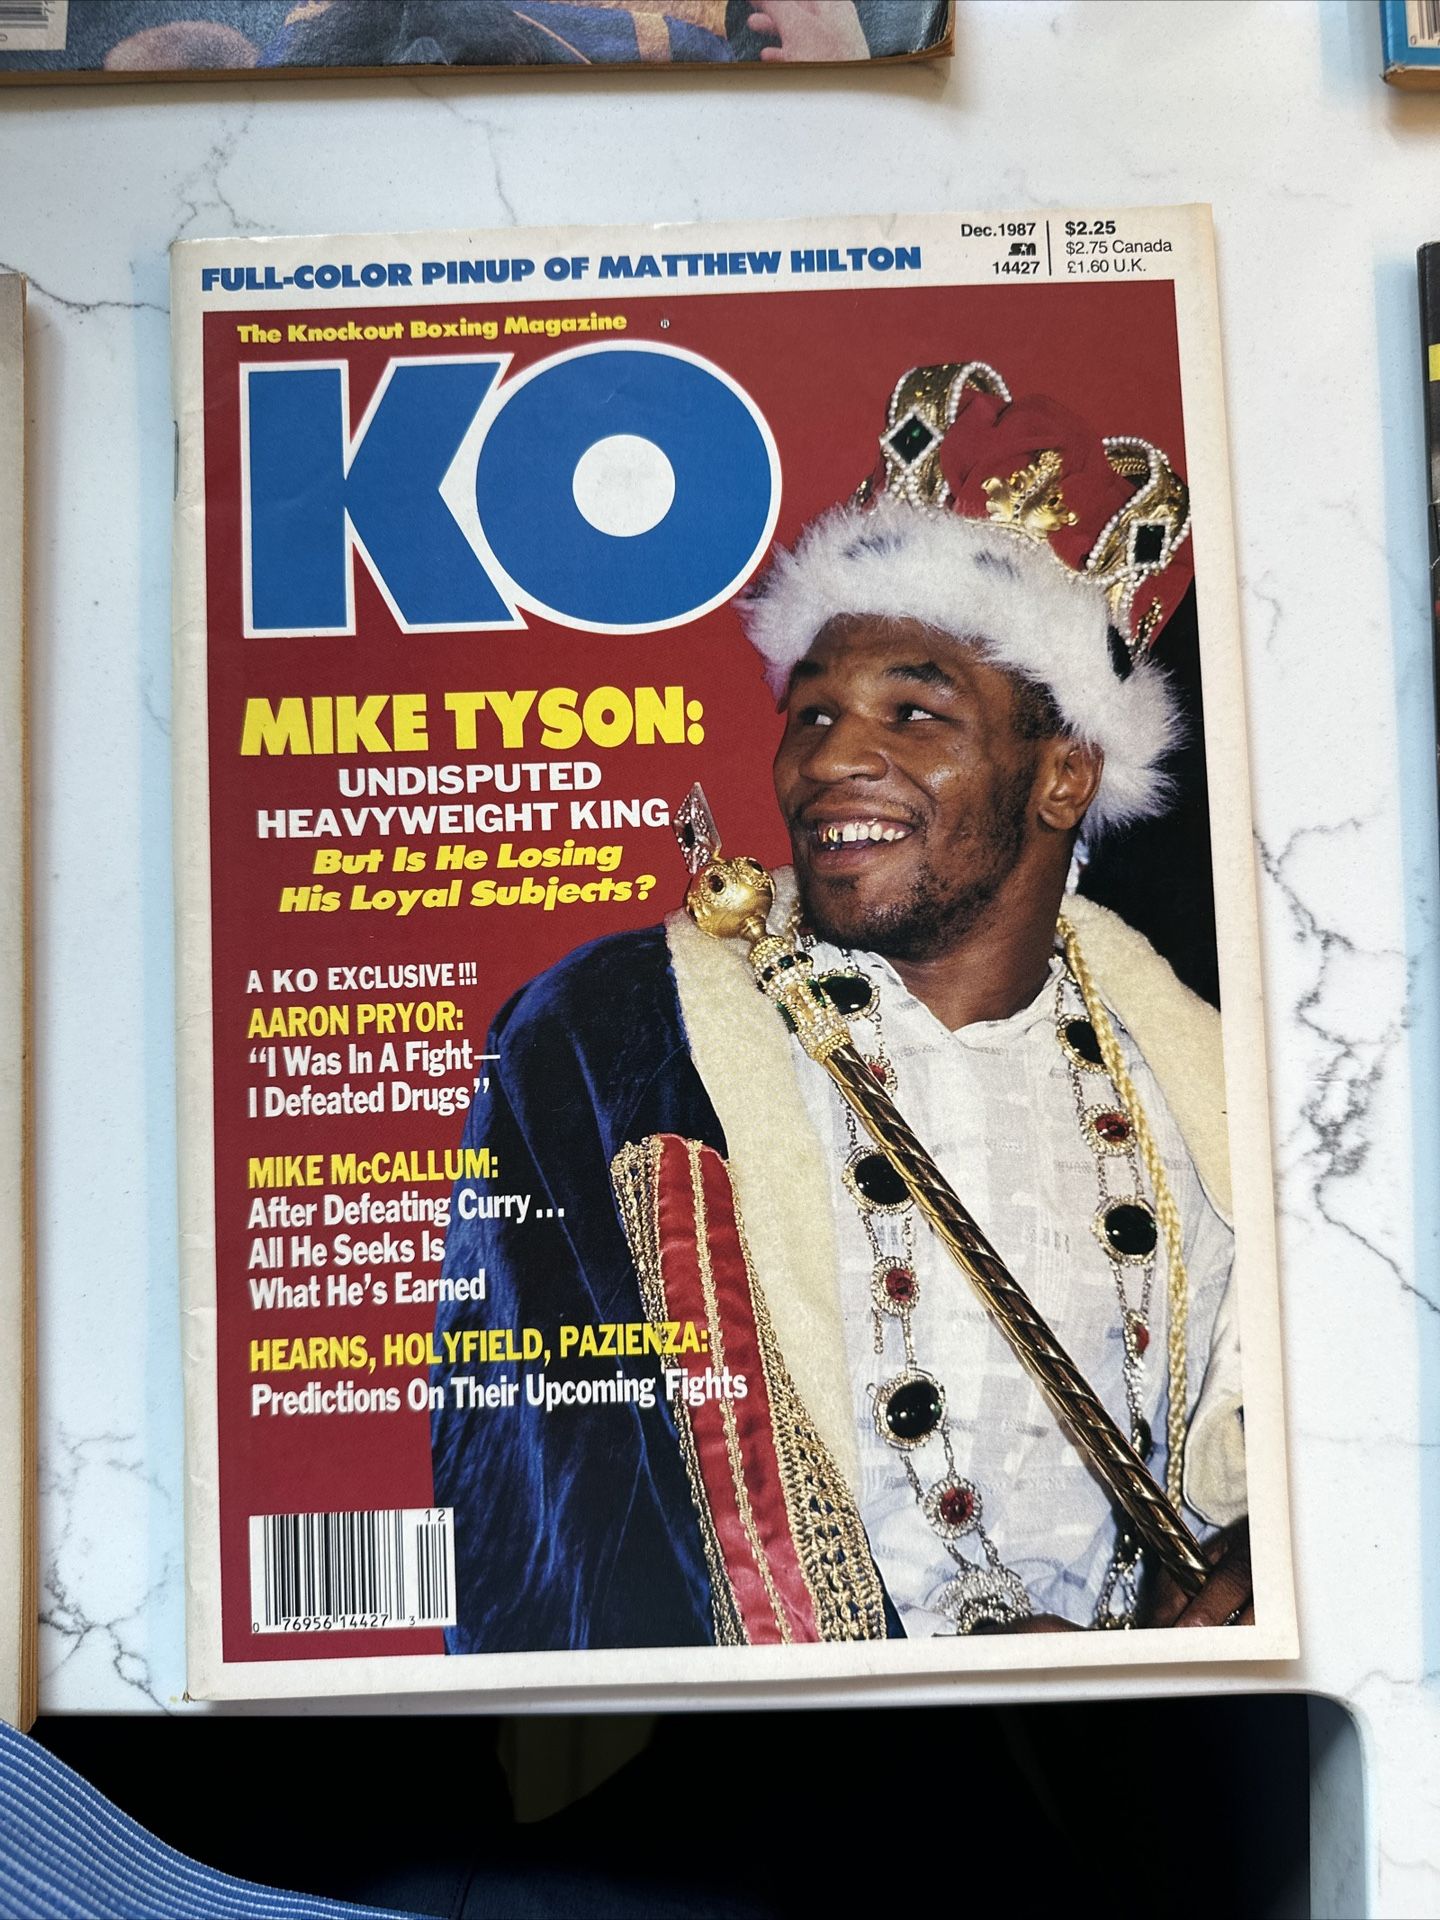 Boxing Magazines And Vintage Speed Bag 